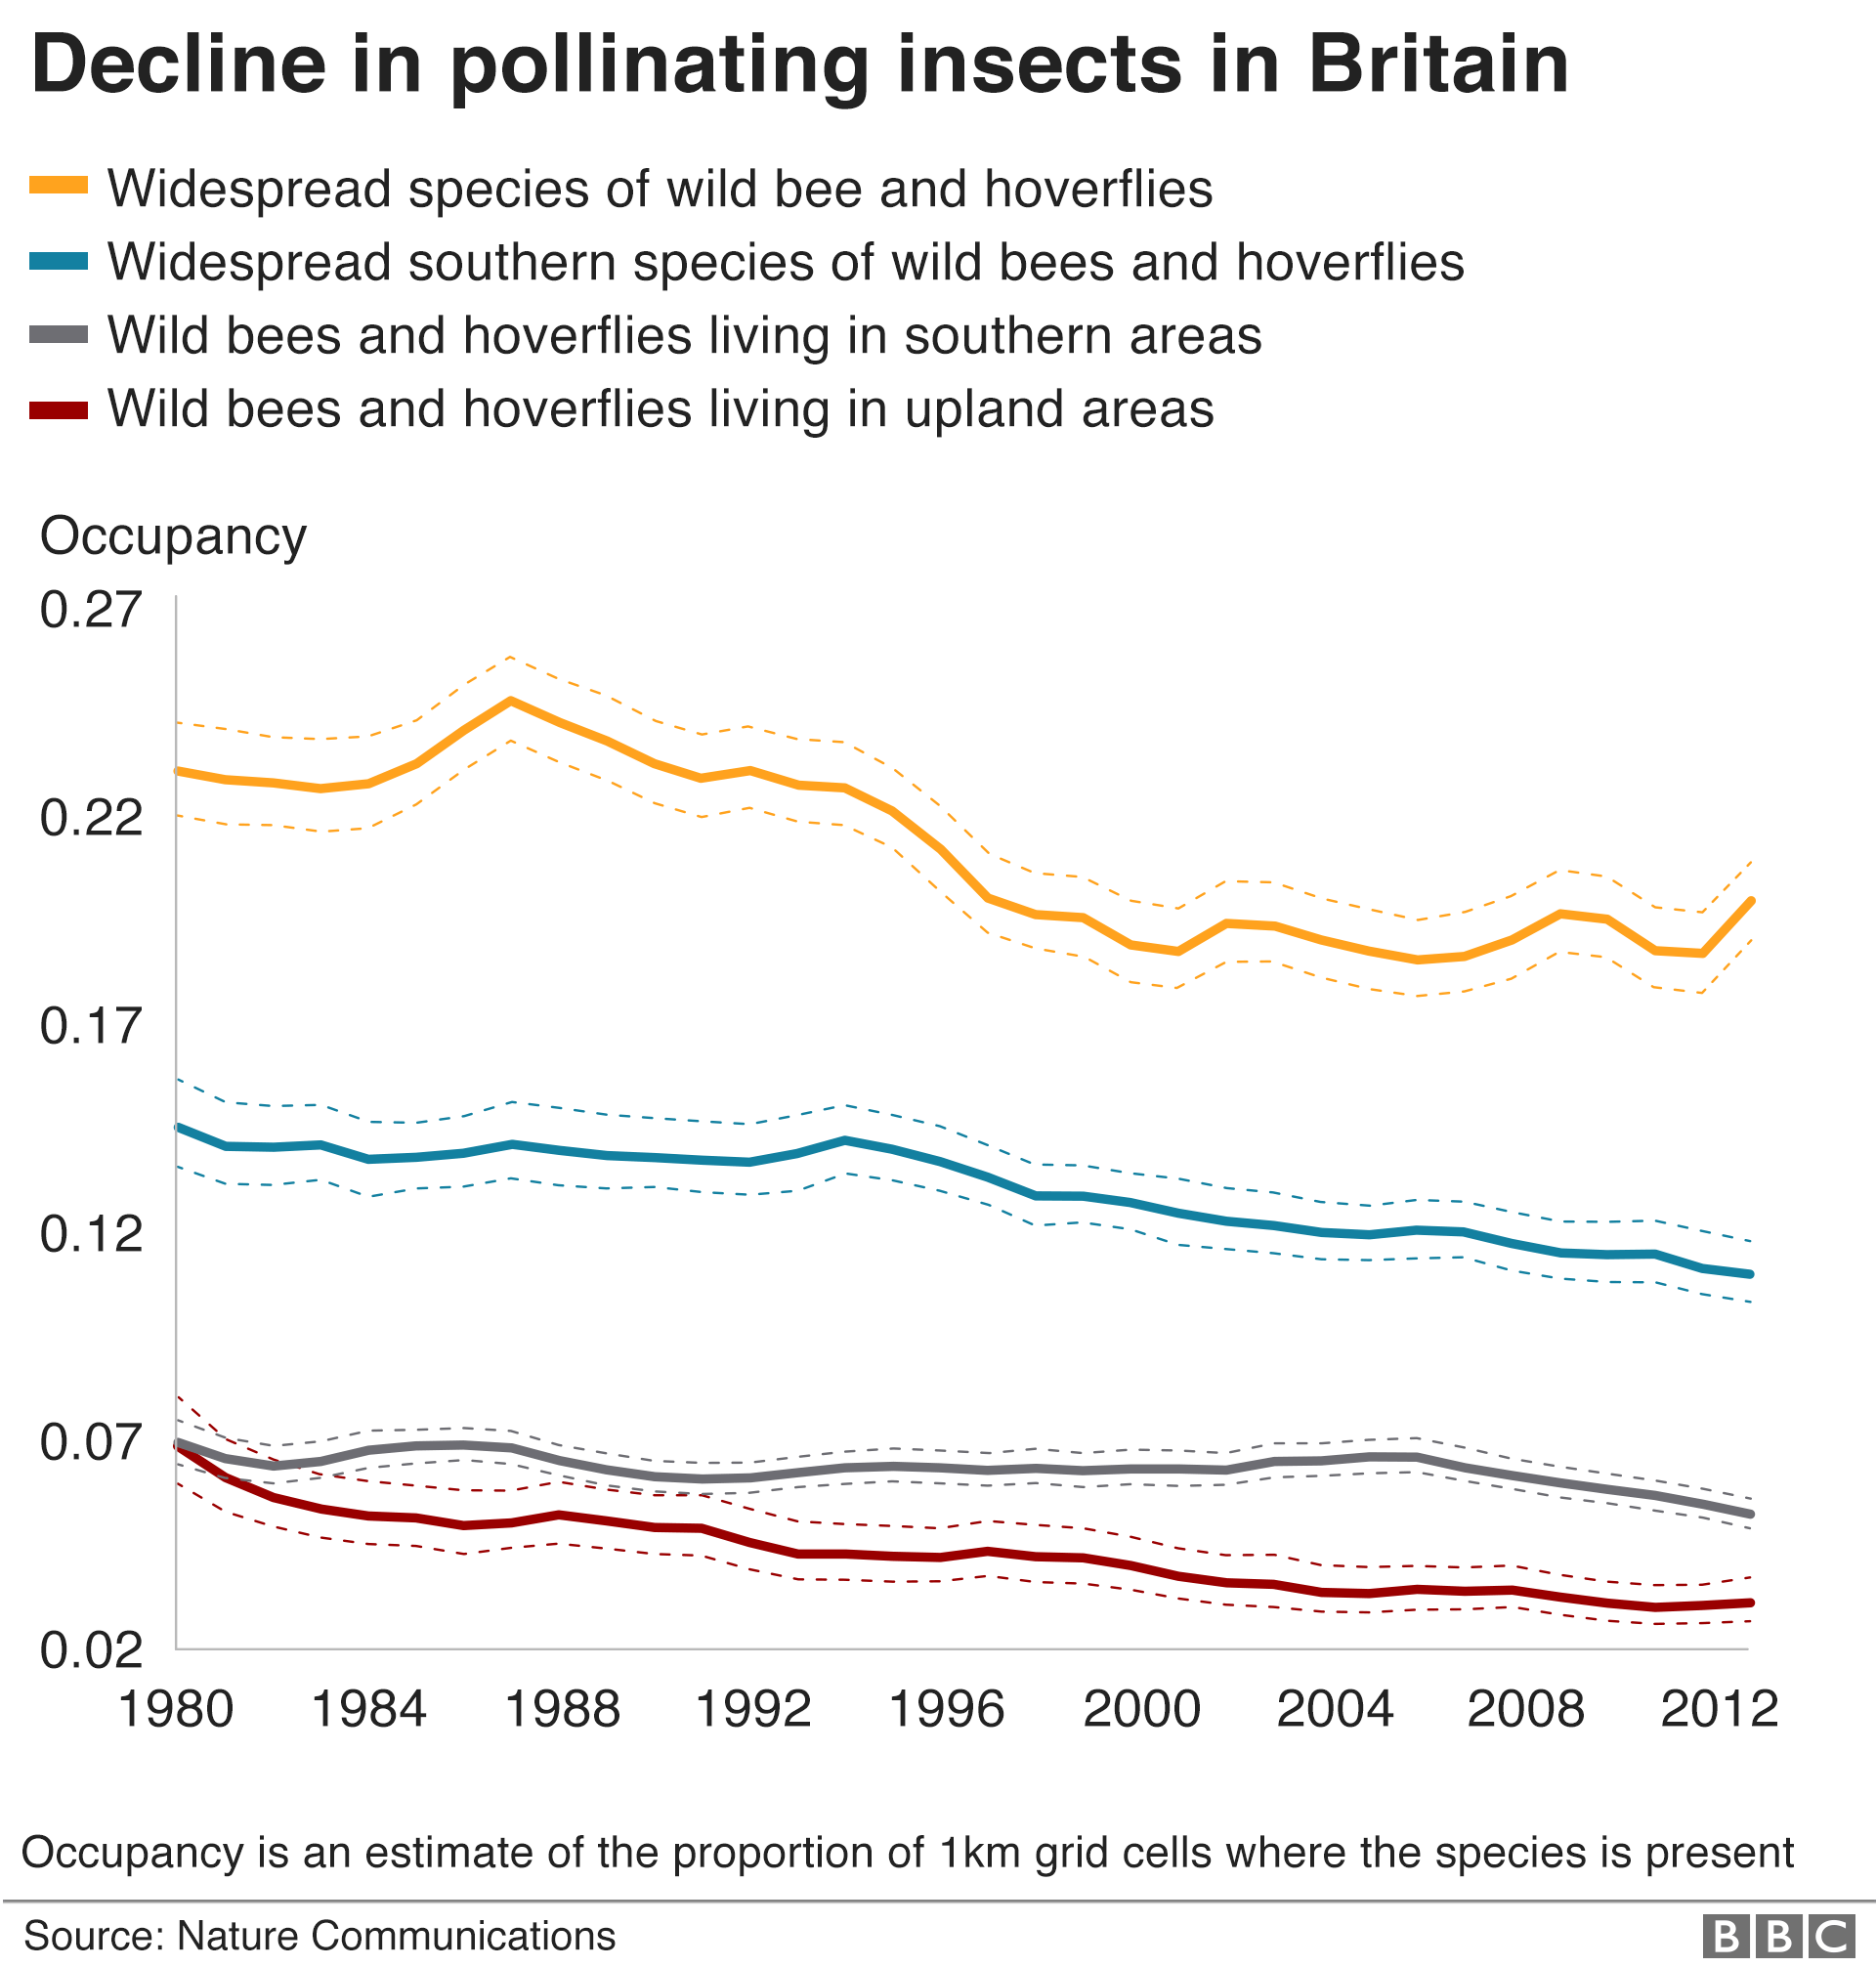 Decline of pollinating insects in Britain